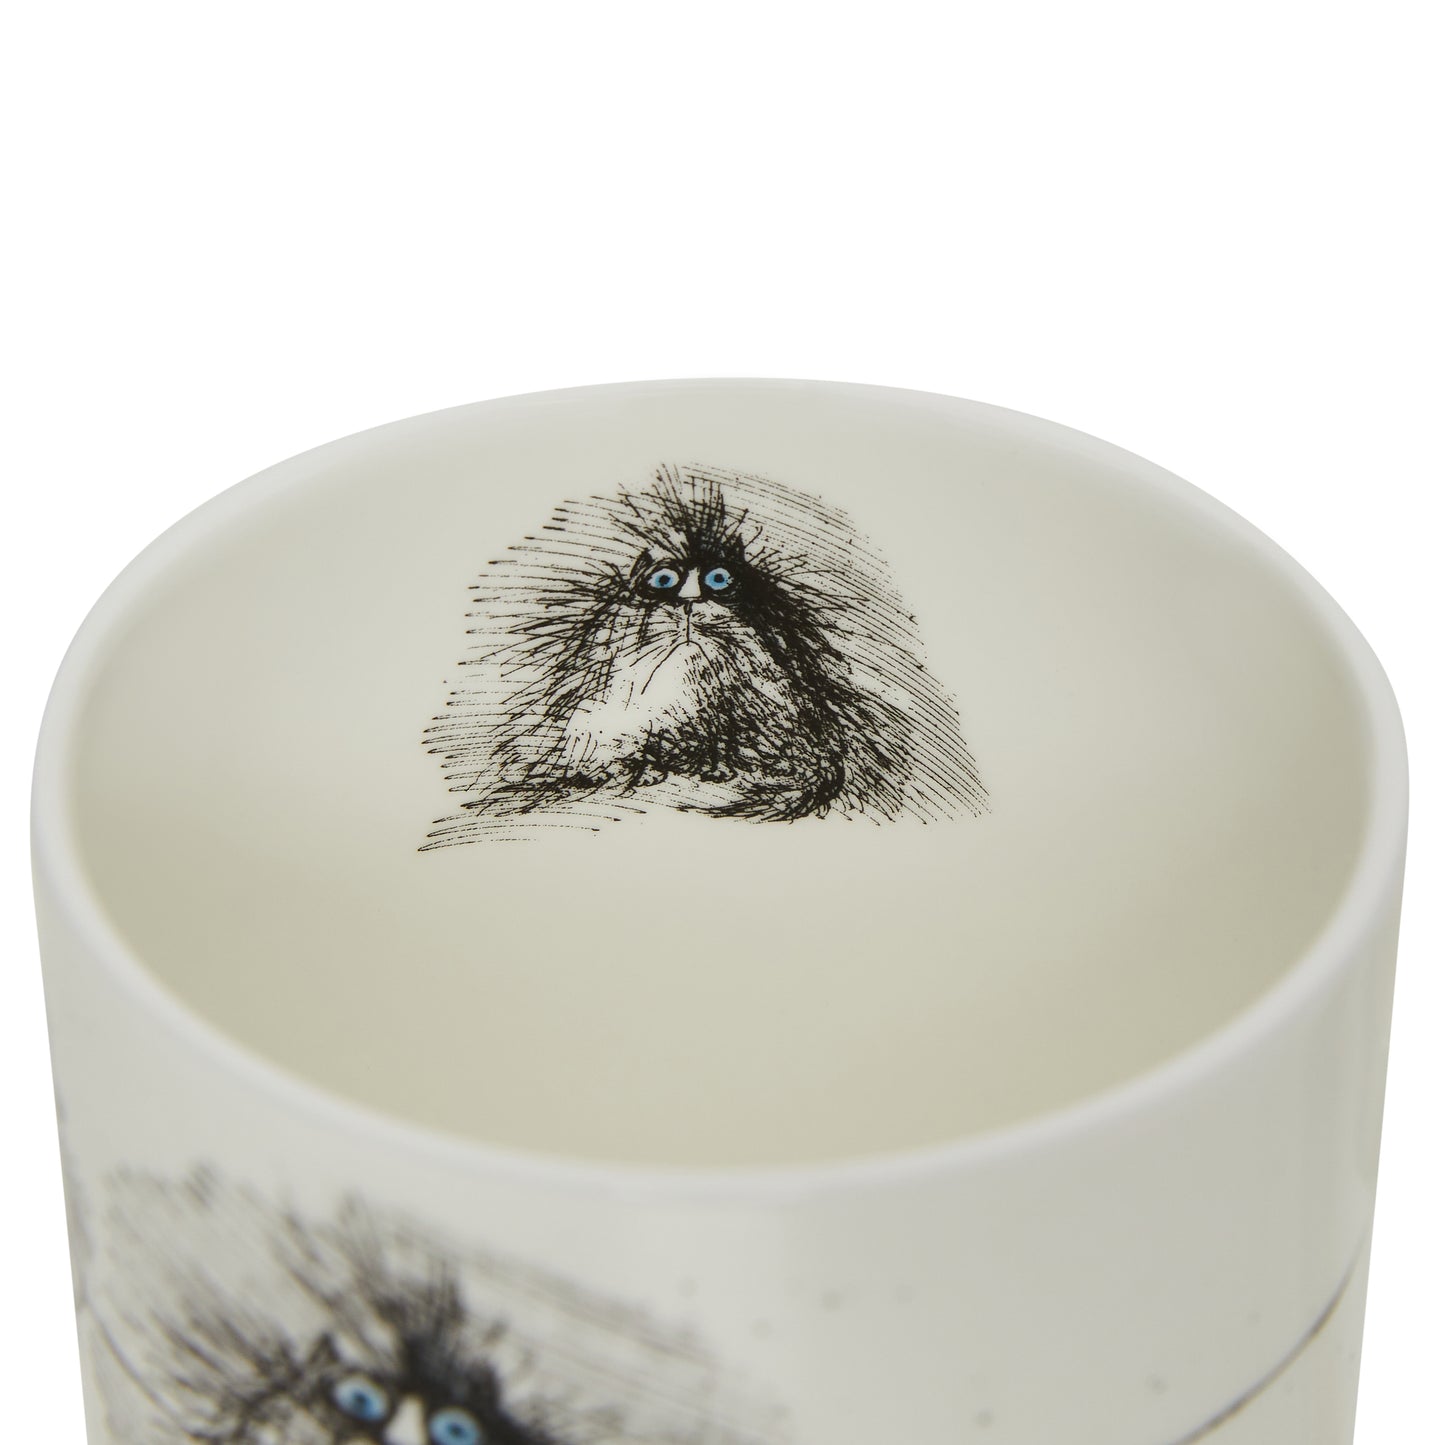 Interior of white bone china mug, showing grumpy cat detail in black line work. By Ronald Searle. From the collection of the Fitzwiliam Museum.